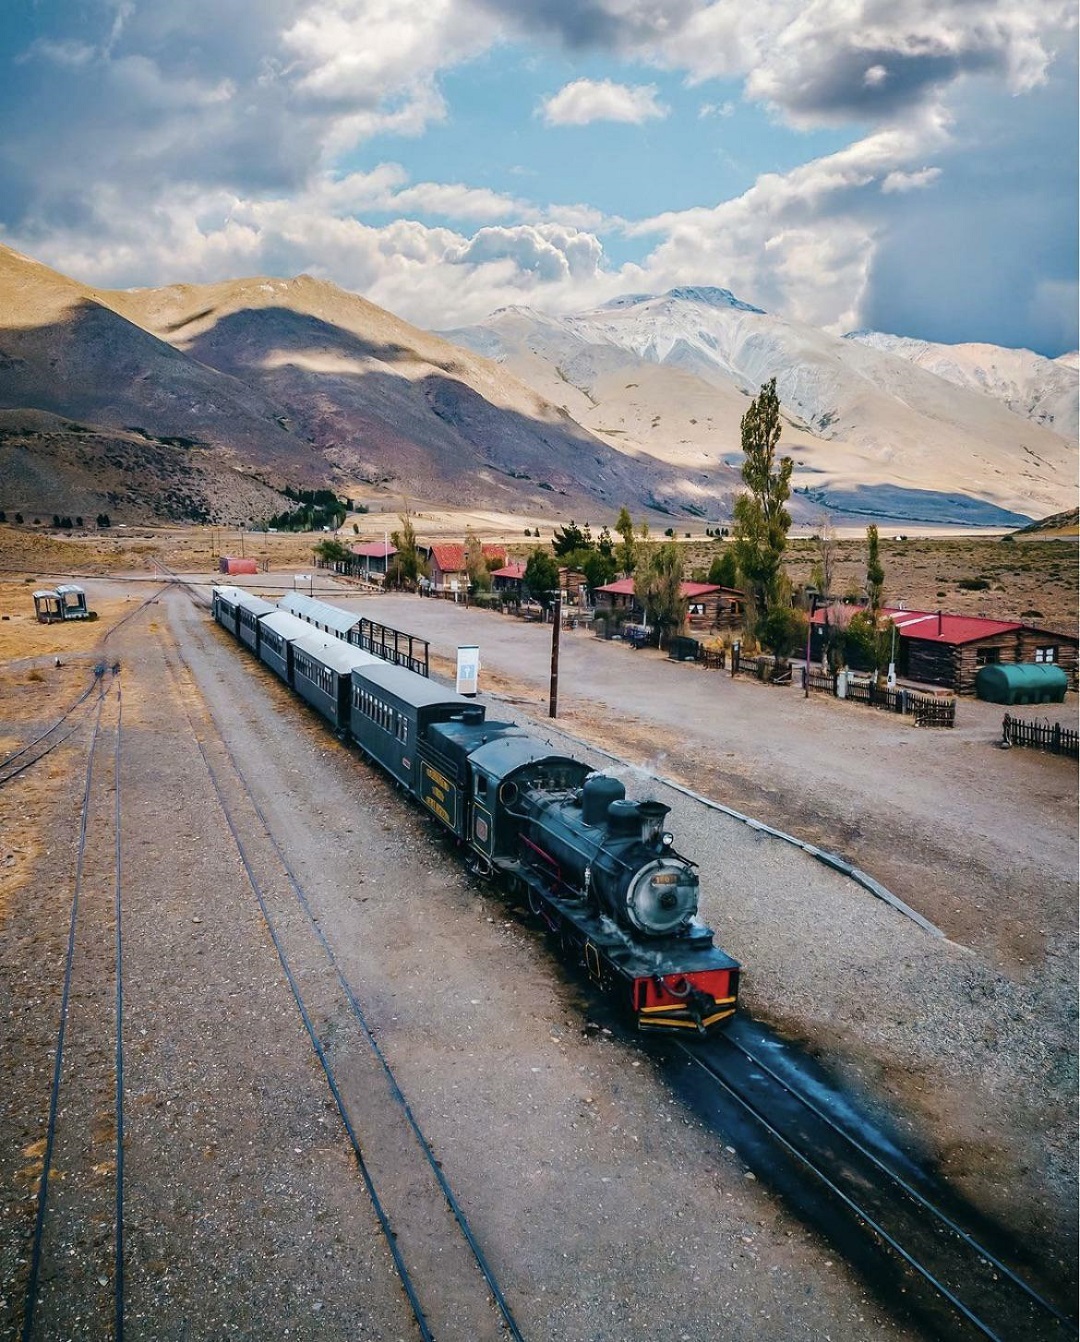 Train In Argentine’s Patagonia (Esquel, Chubut Province)